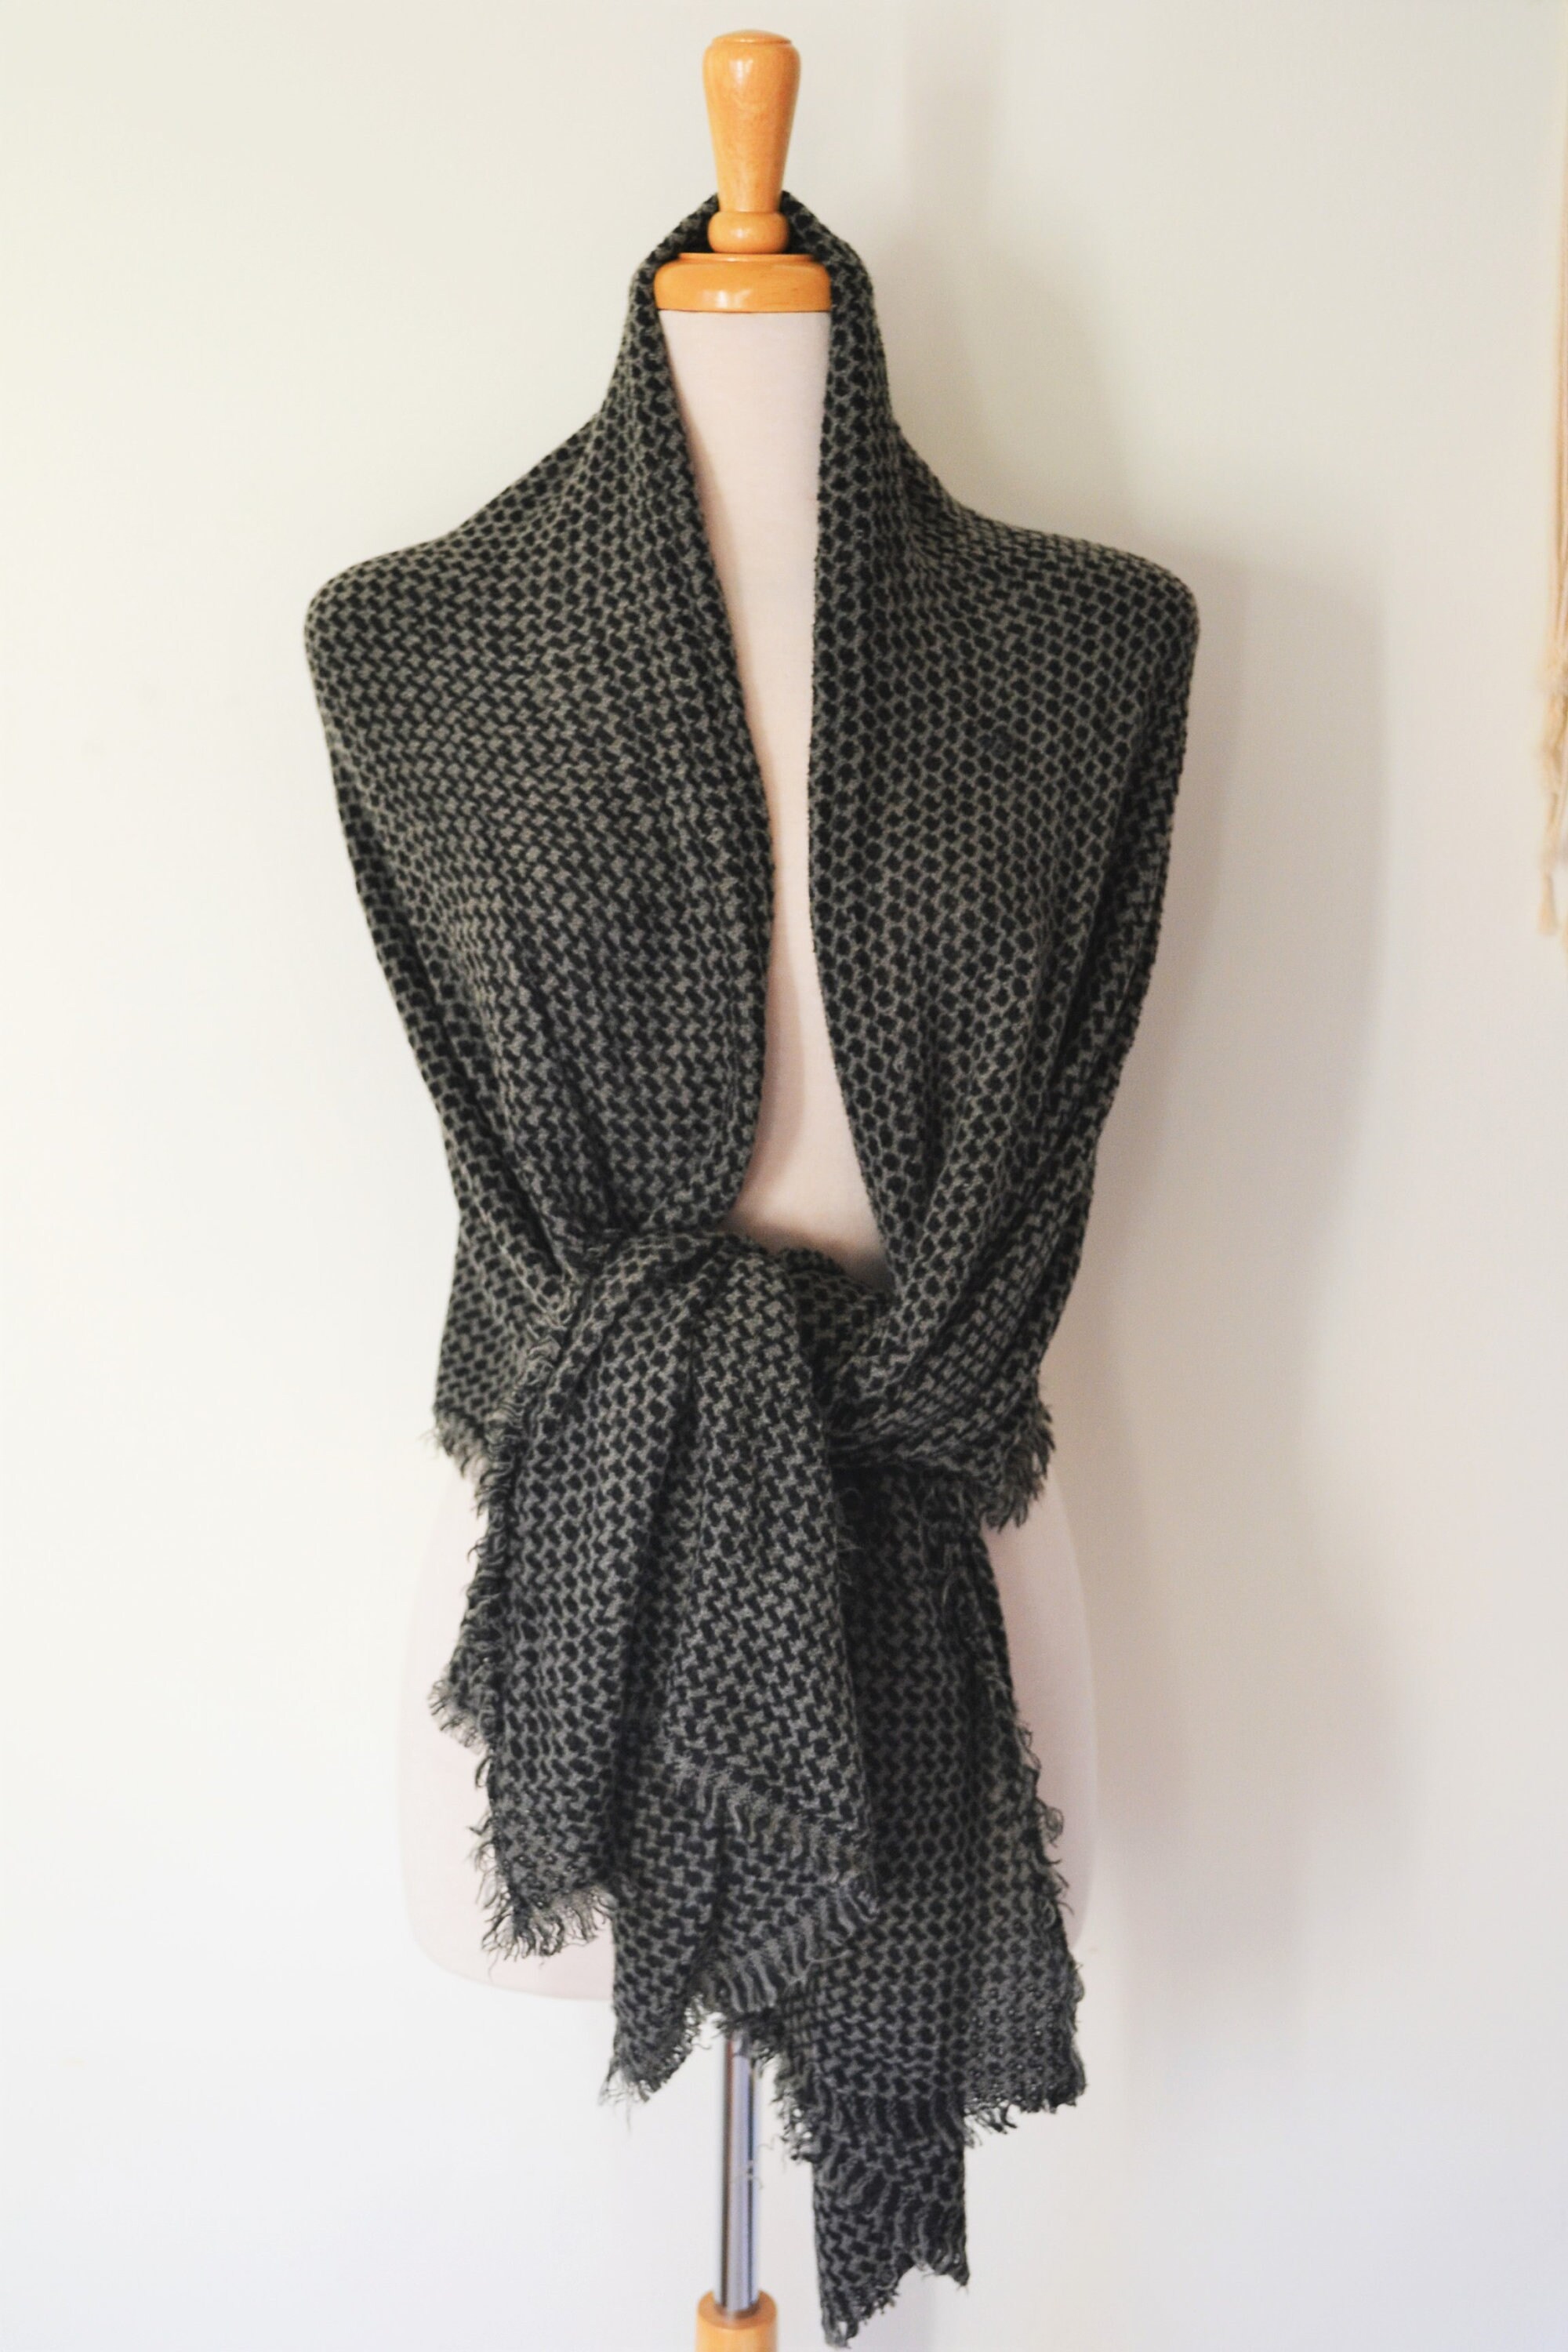 Buttery Soft Cashmere Blend Blanket Wrap, Mini Houndstooth Print, Cozy Warm Throw Womens Fashion Shawls, Knits